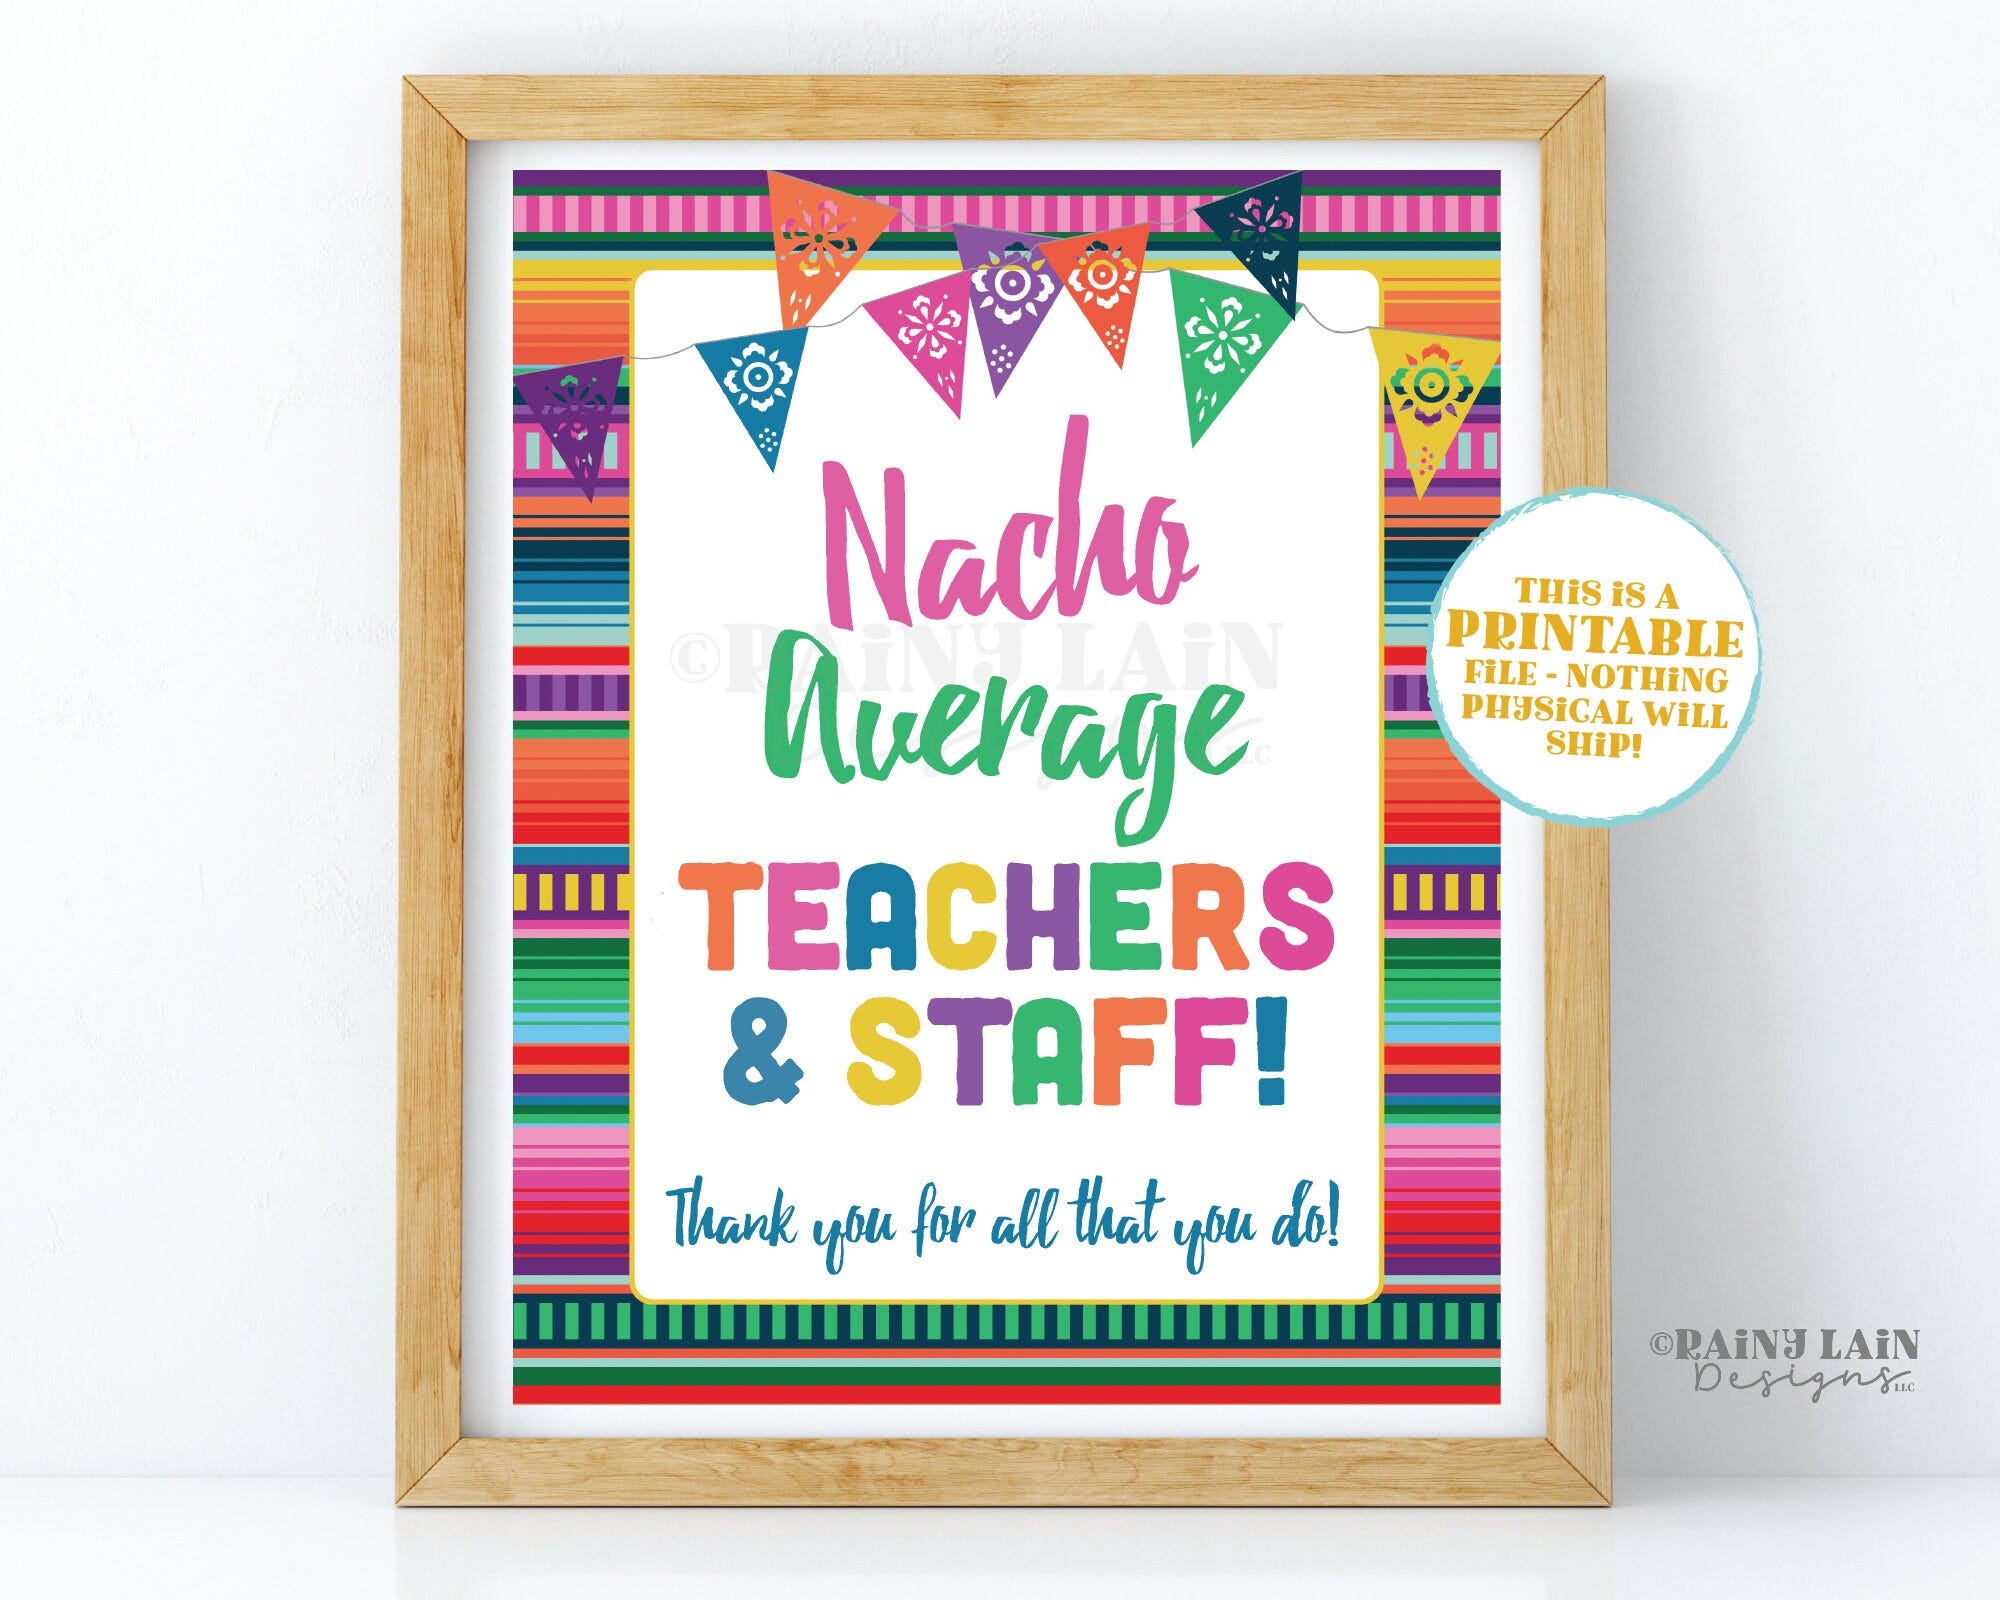 Nacho Average Teachers and Staff Sign Muchas Gracias for all you do Thank you Teacher Appreciation Sign Printable Fiesta Decorations